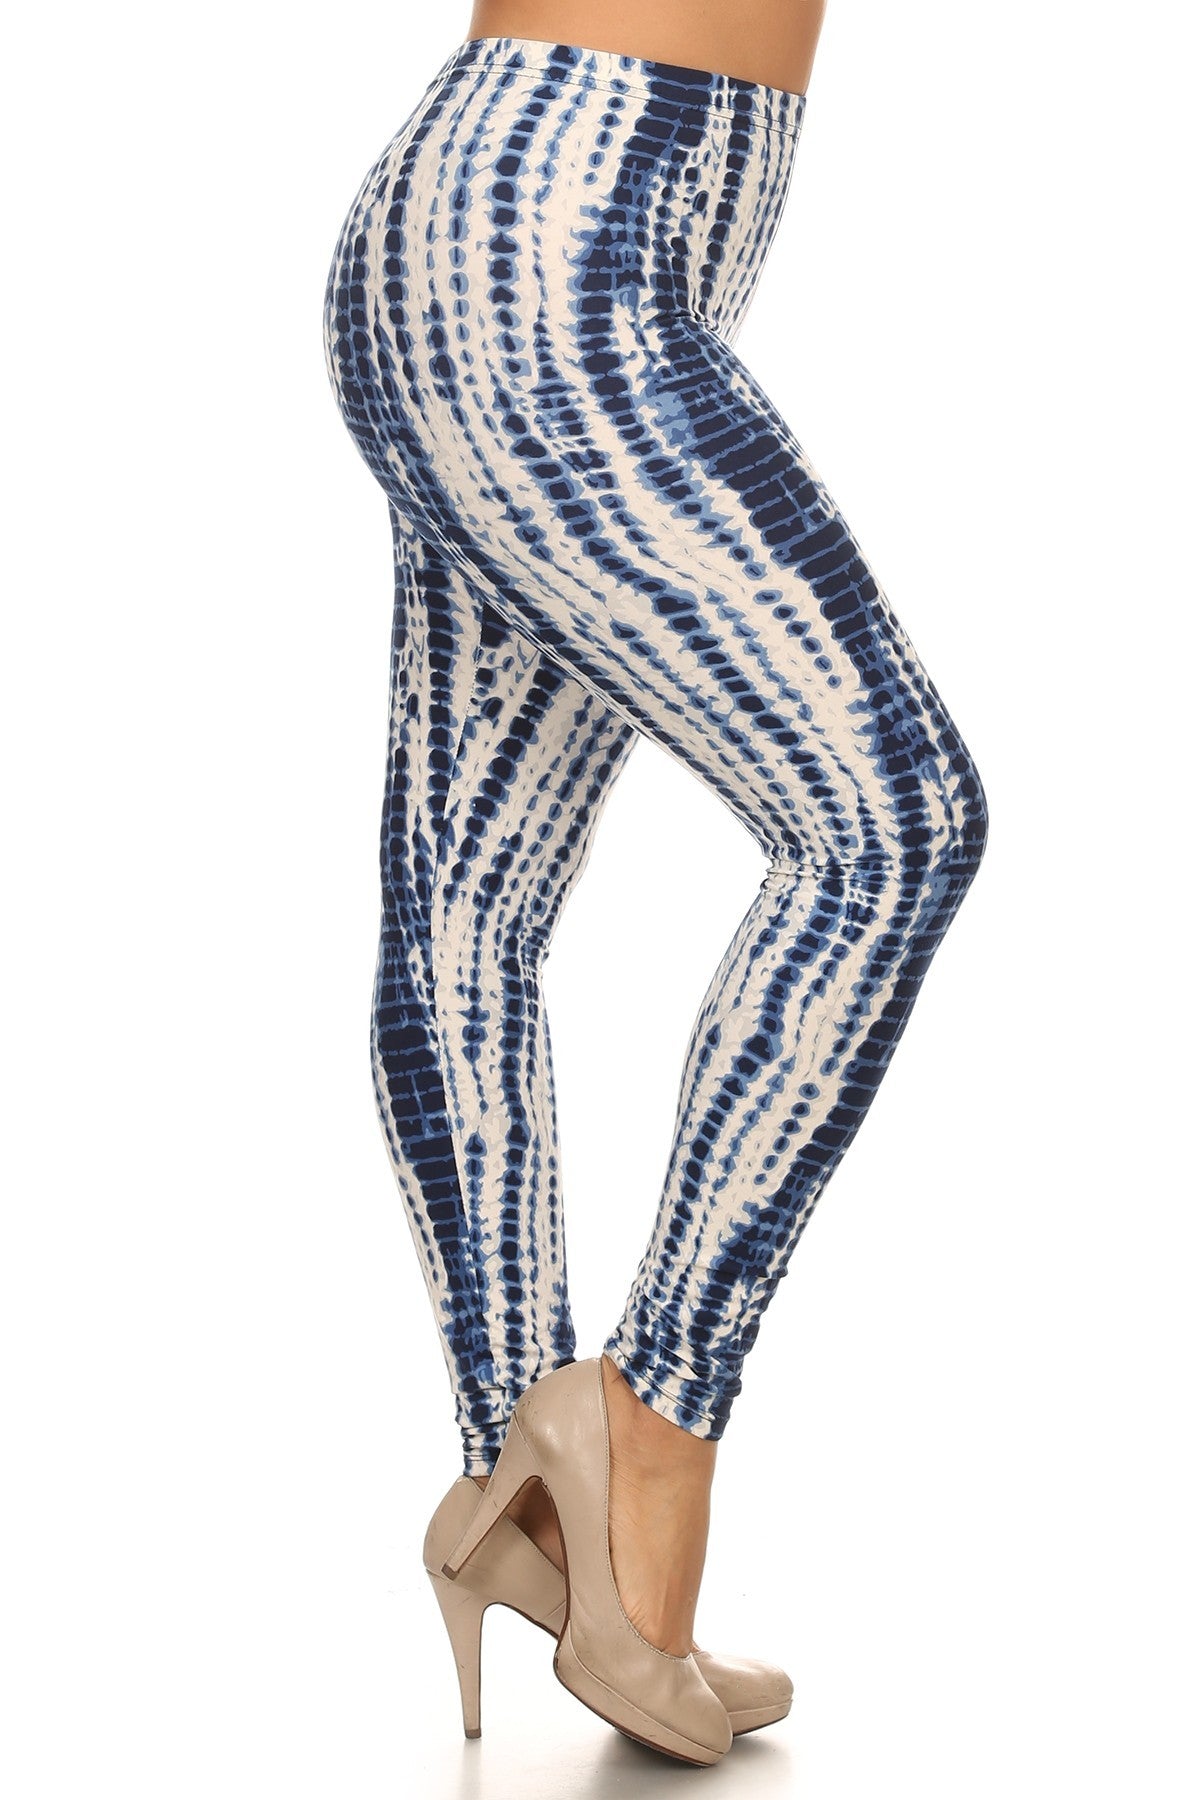 Tie Dye Print Plus Size Full Length Leggings In A Slim Fitting Style With A Banded High Waist Girl Code 